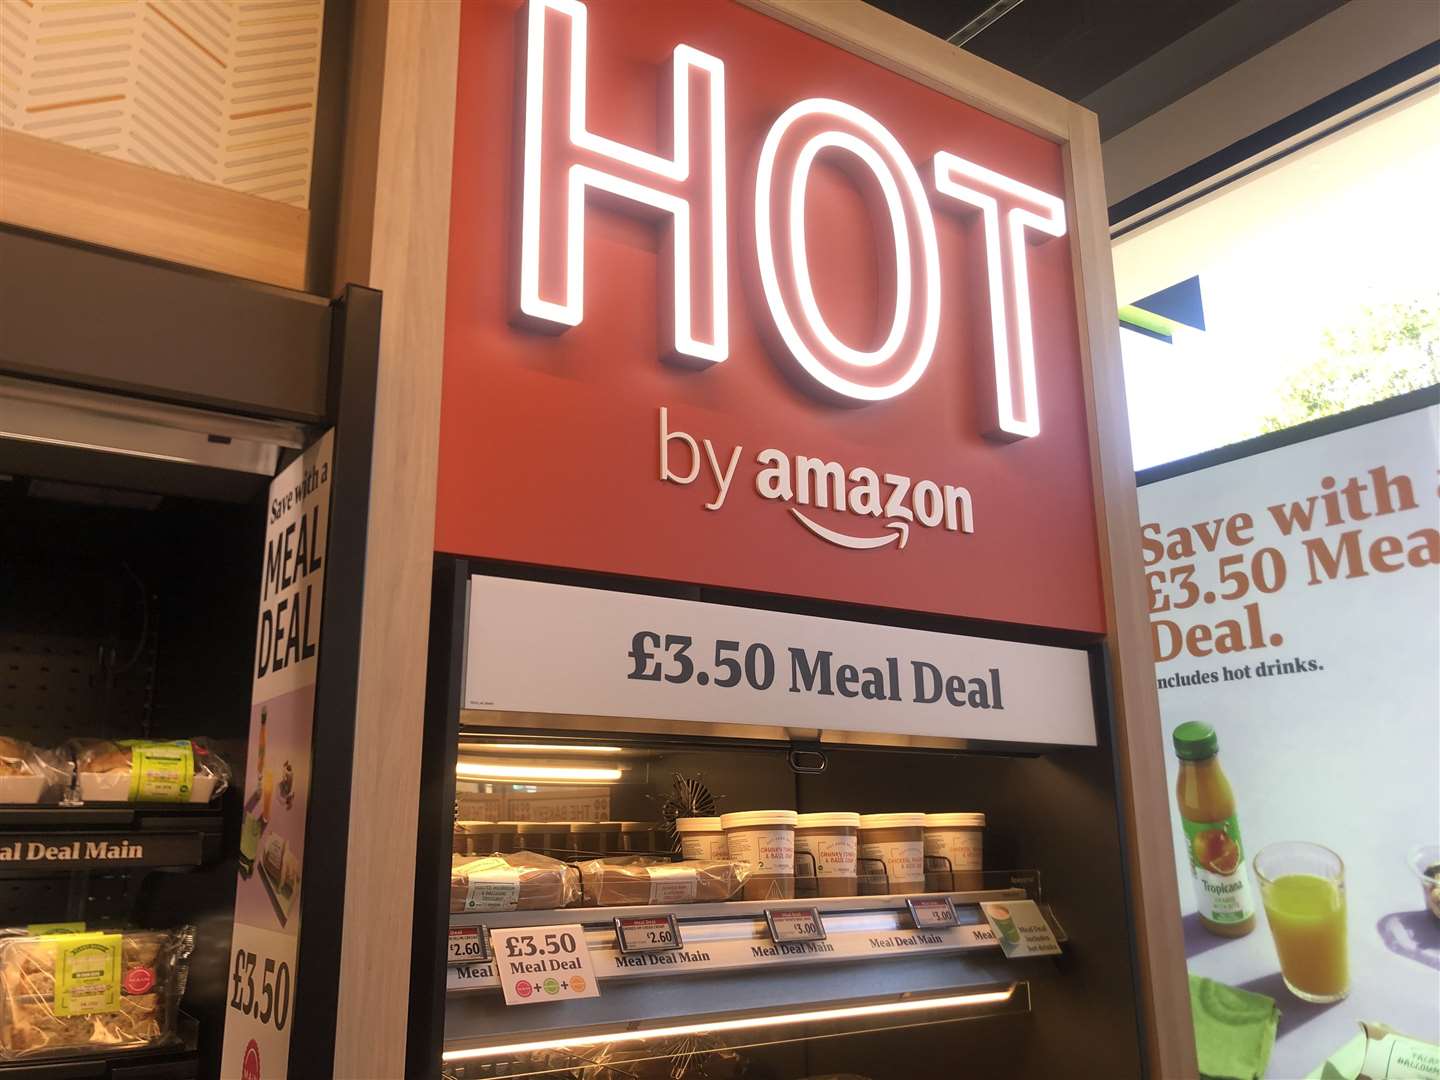 There's even a hot deli counter offering a £3.50 meal deal